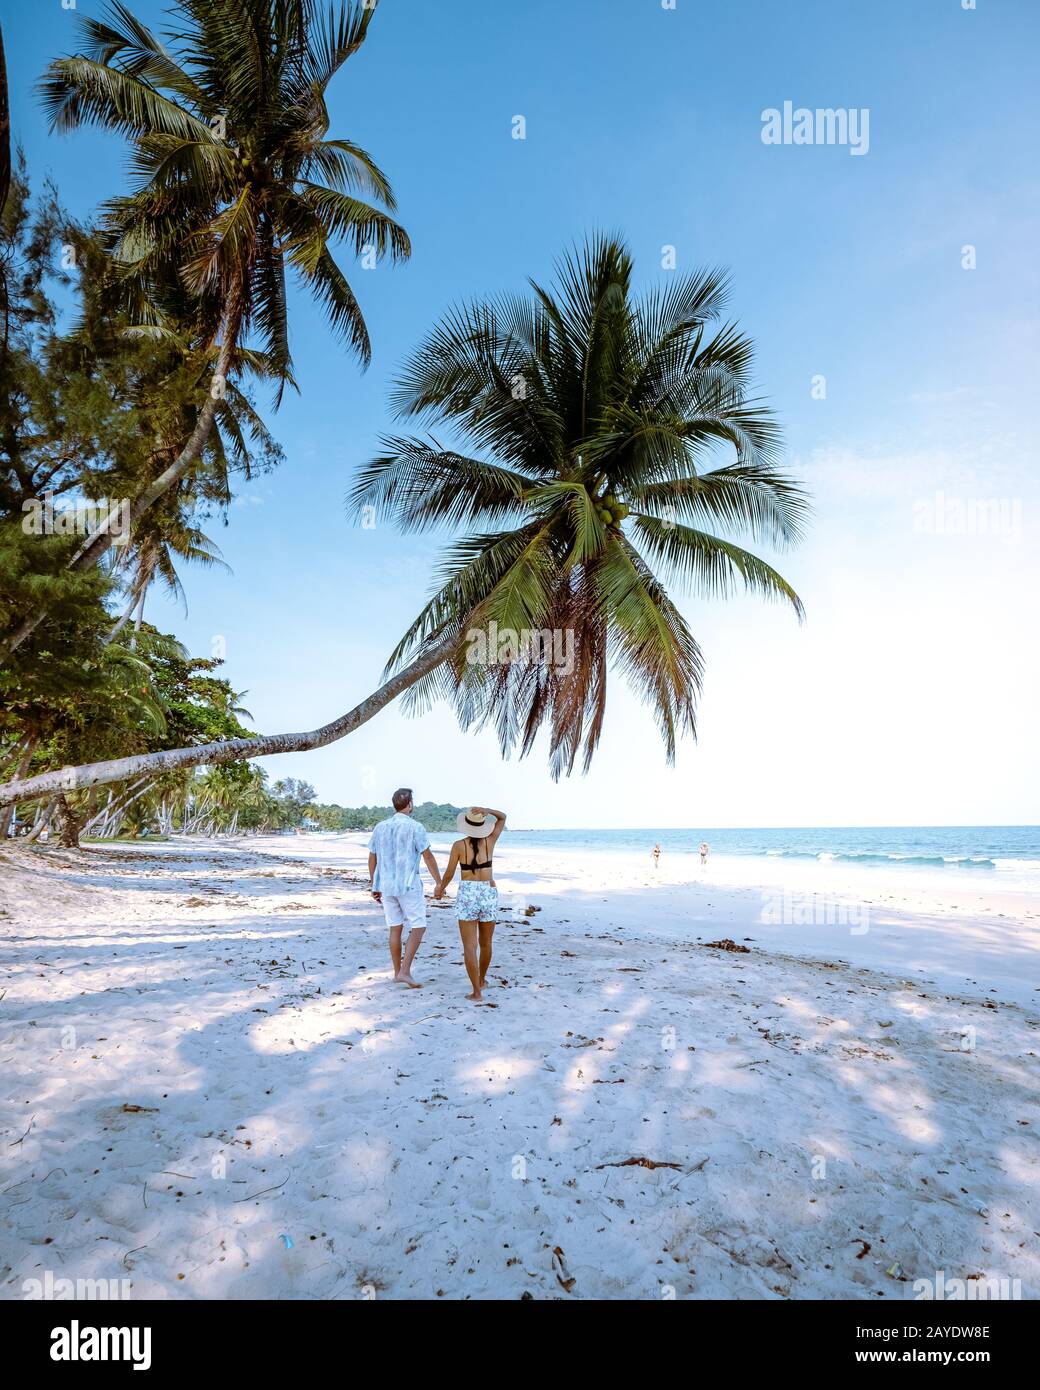 Wua Laen beach Chumphon area Thailand, palm tree hanging over the beach with couple on vacation in Thailand Asia Stock Photo